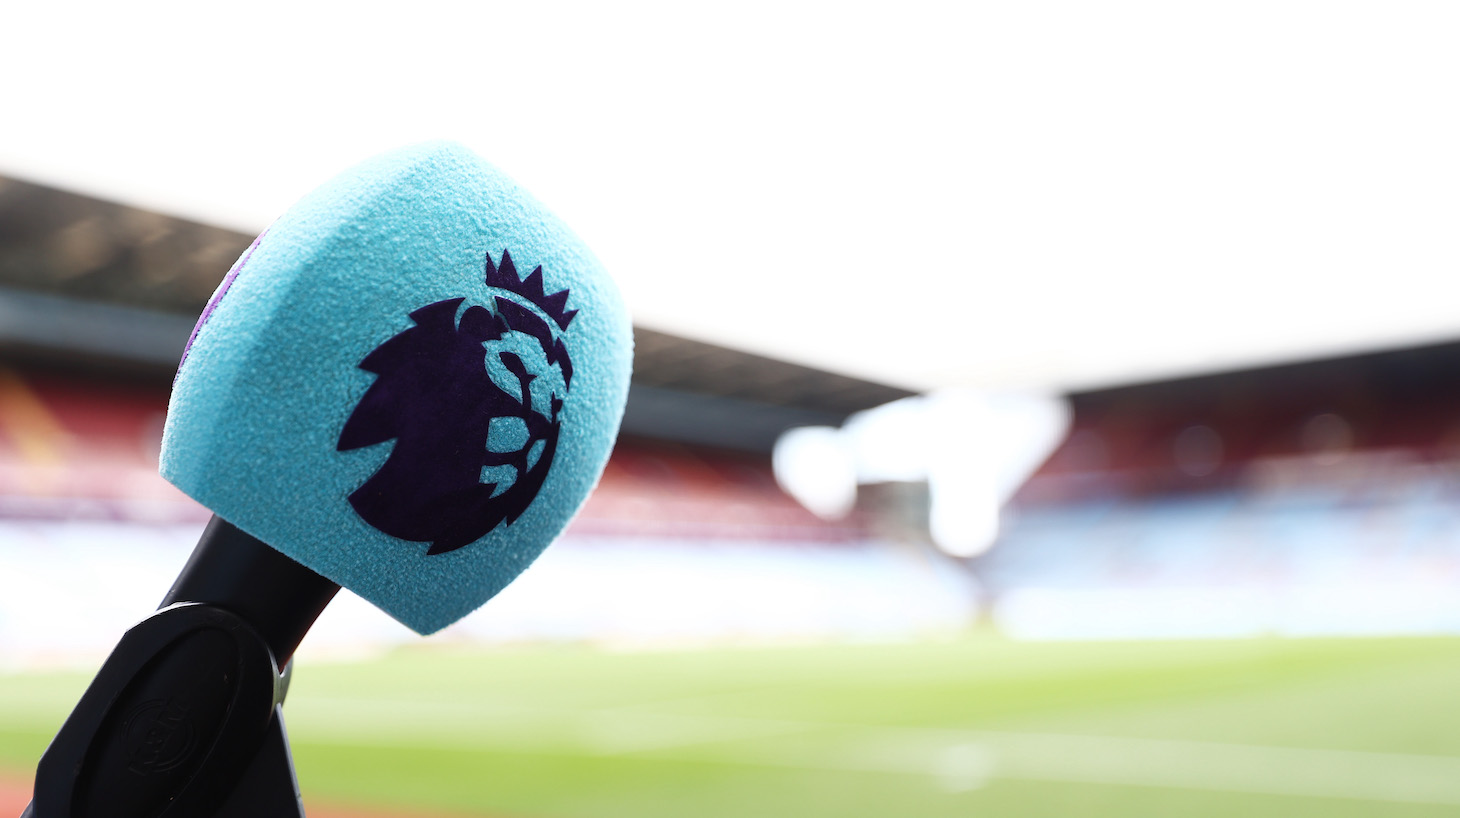 A detailed of a Premier League microphone prior to the Premier League match between Aston Villa and Liverpool at Villa Park on May 10, 2022 in Birmingham, England.